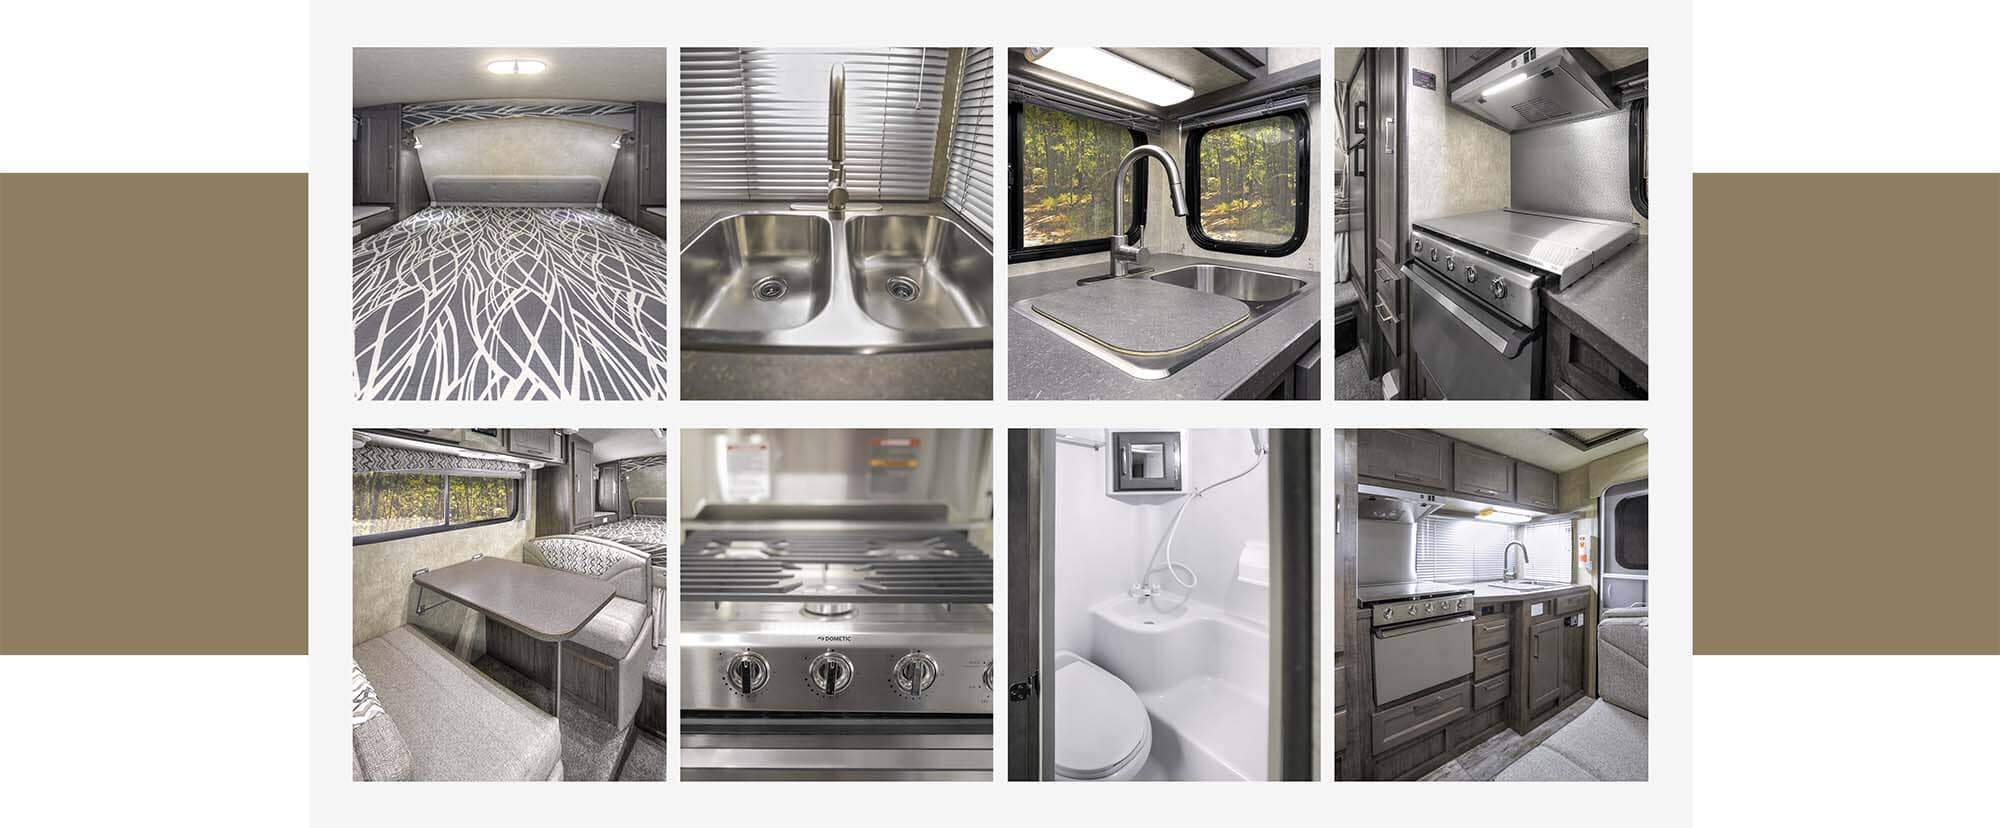 Highlight of interior features of a Bigfoot RV from different angles with brown background